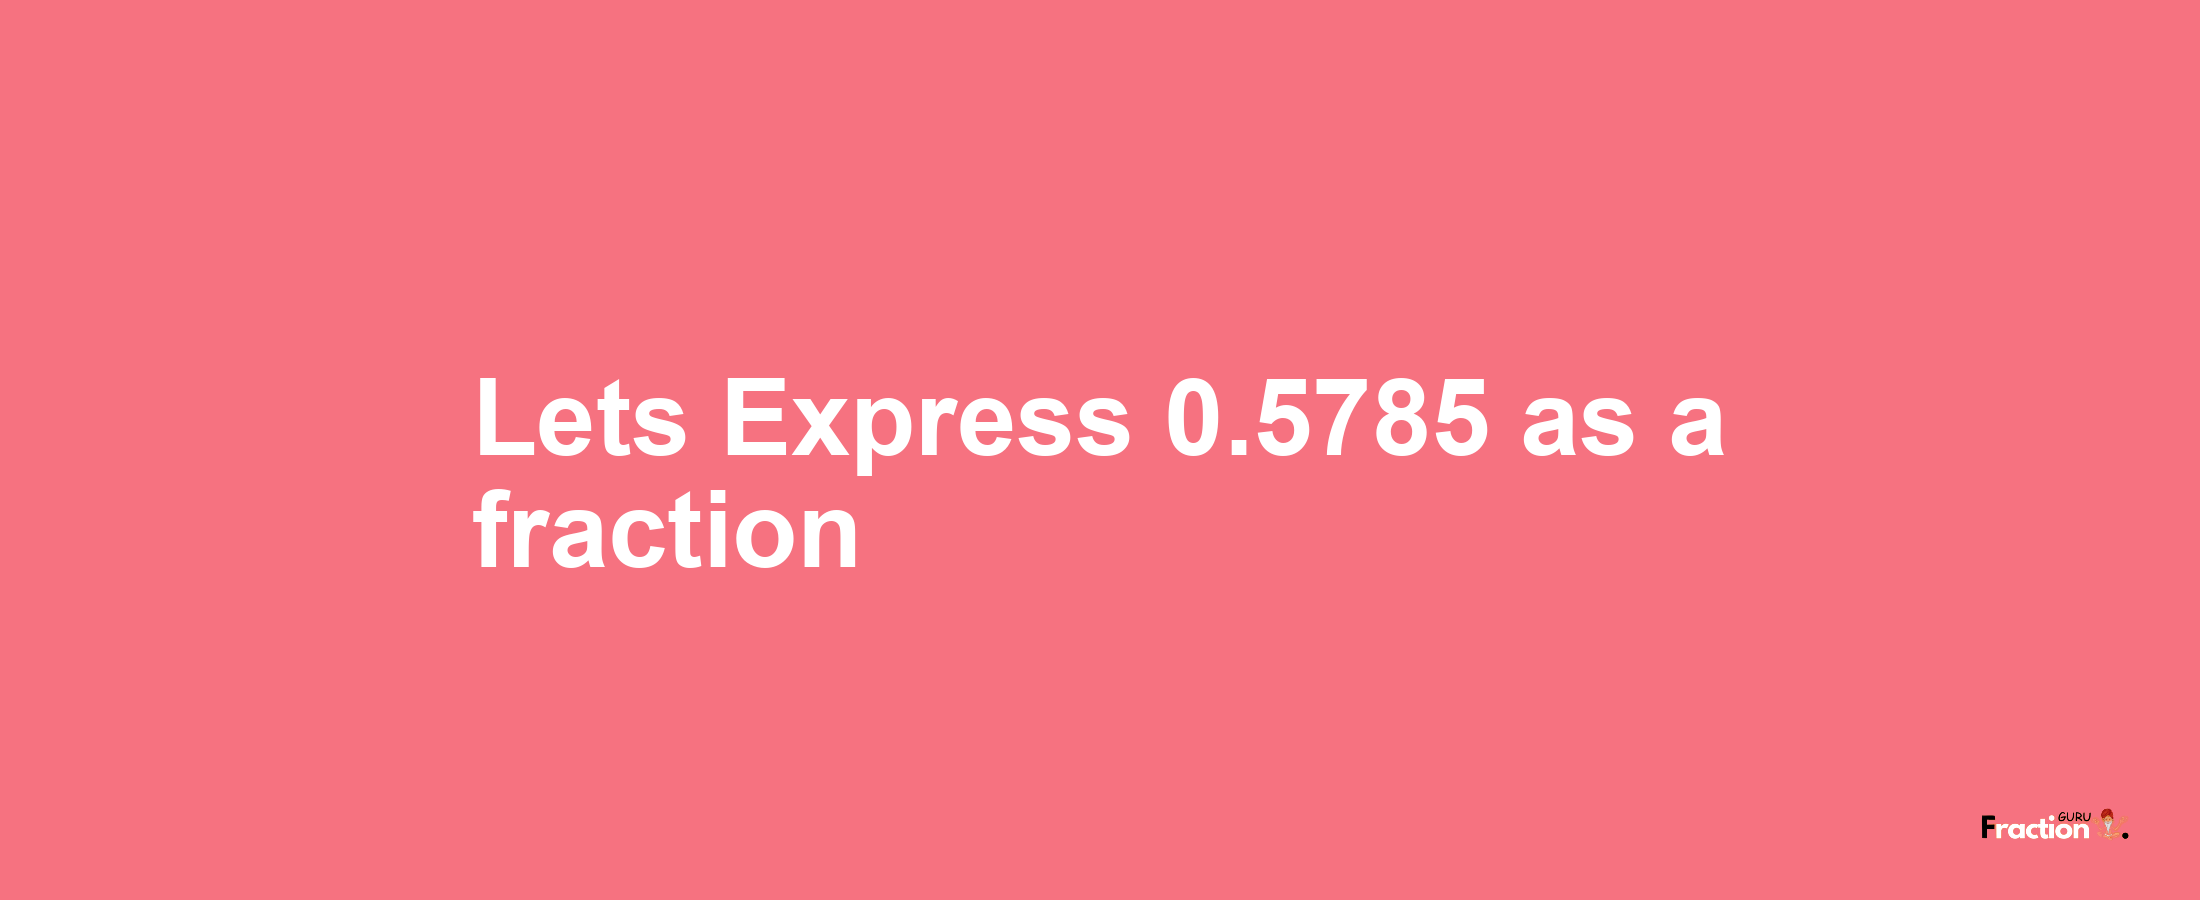 Lets Express 0.5785 as afraction